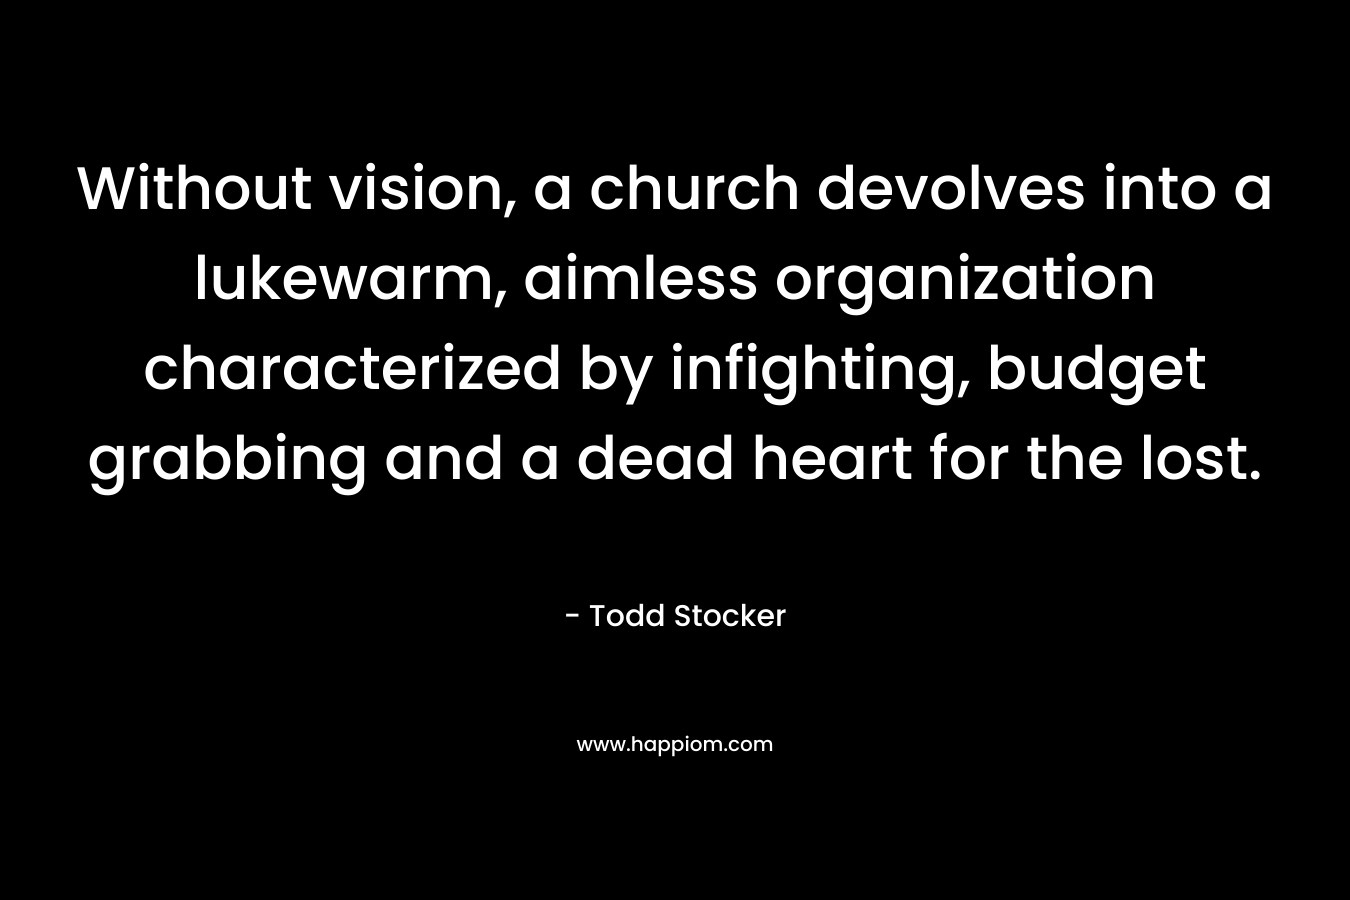 Without vision, a church devolves into a lukewarm, aimless organization characterized by infighting, budget grabbing and a dead heart for the lost.